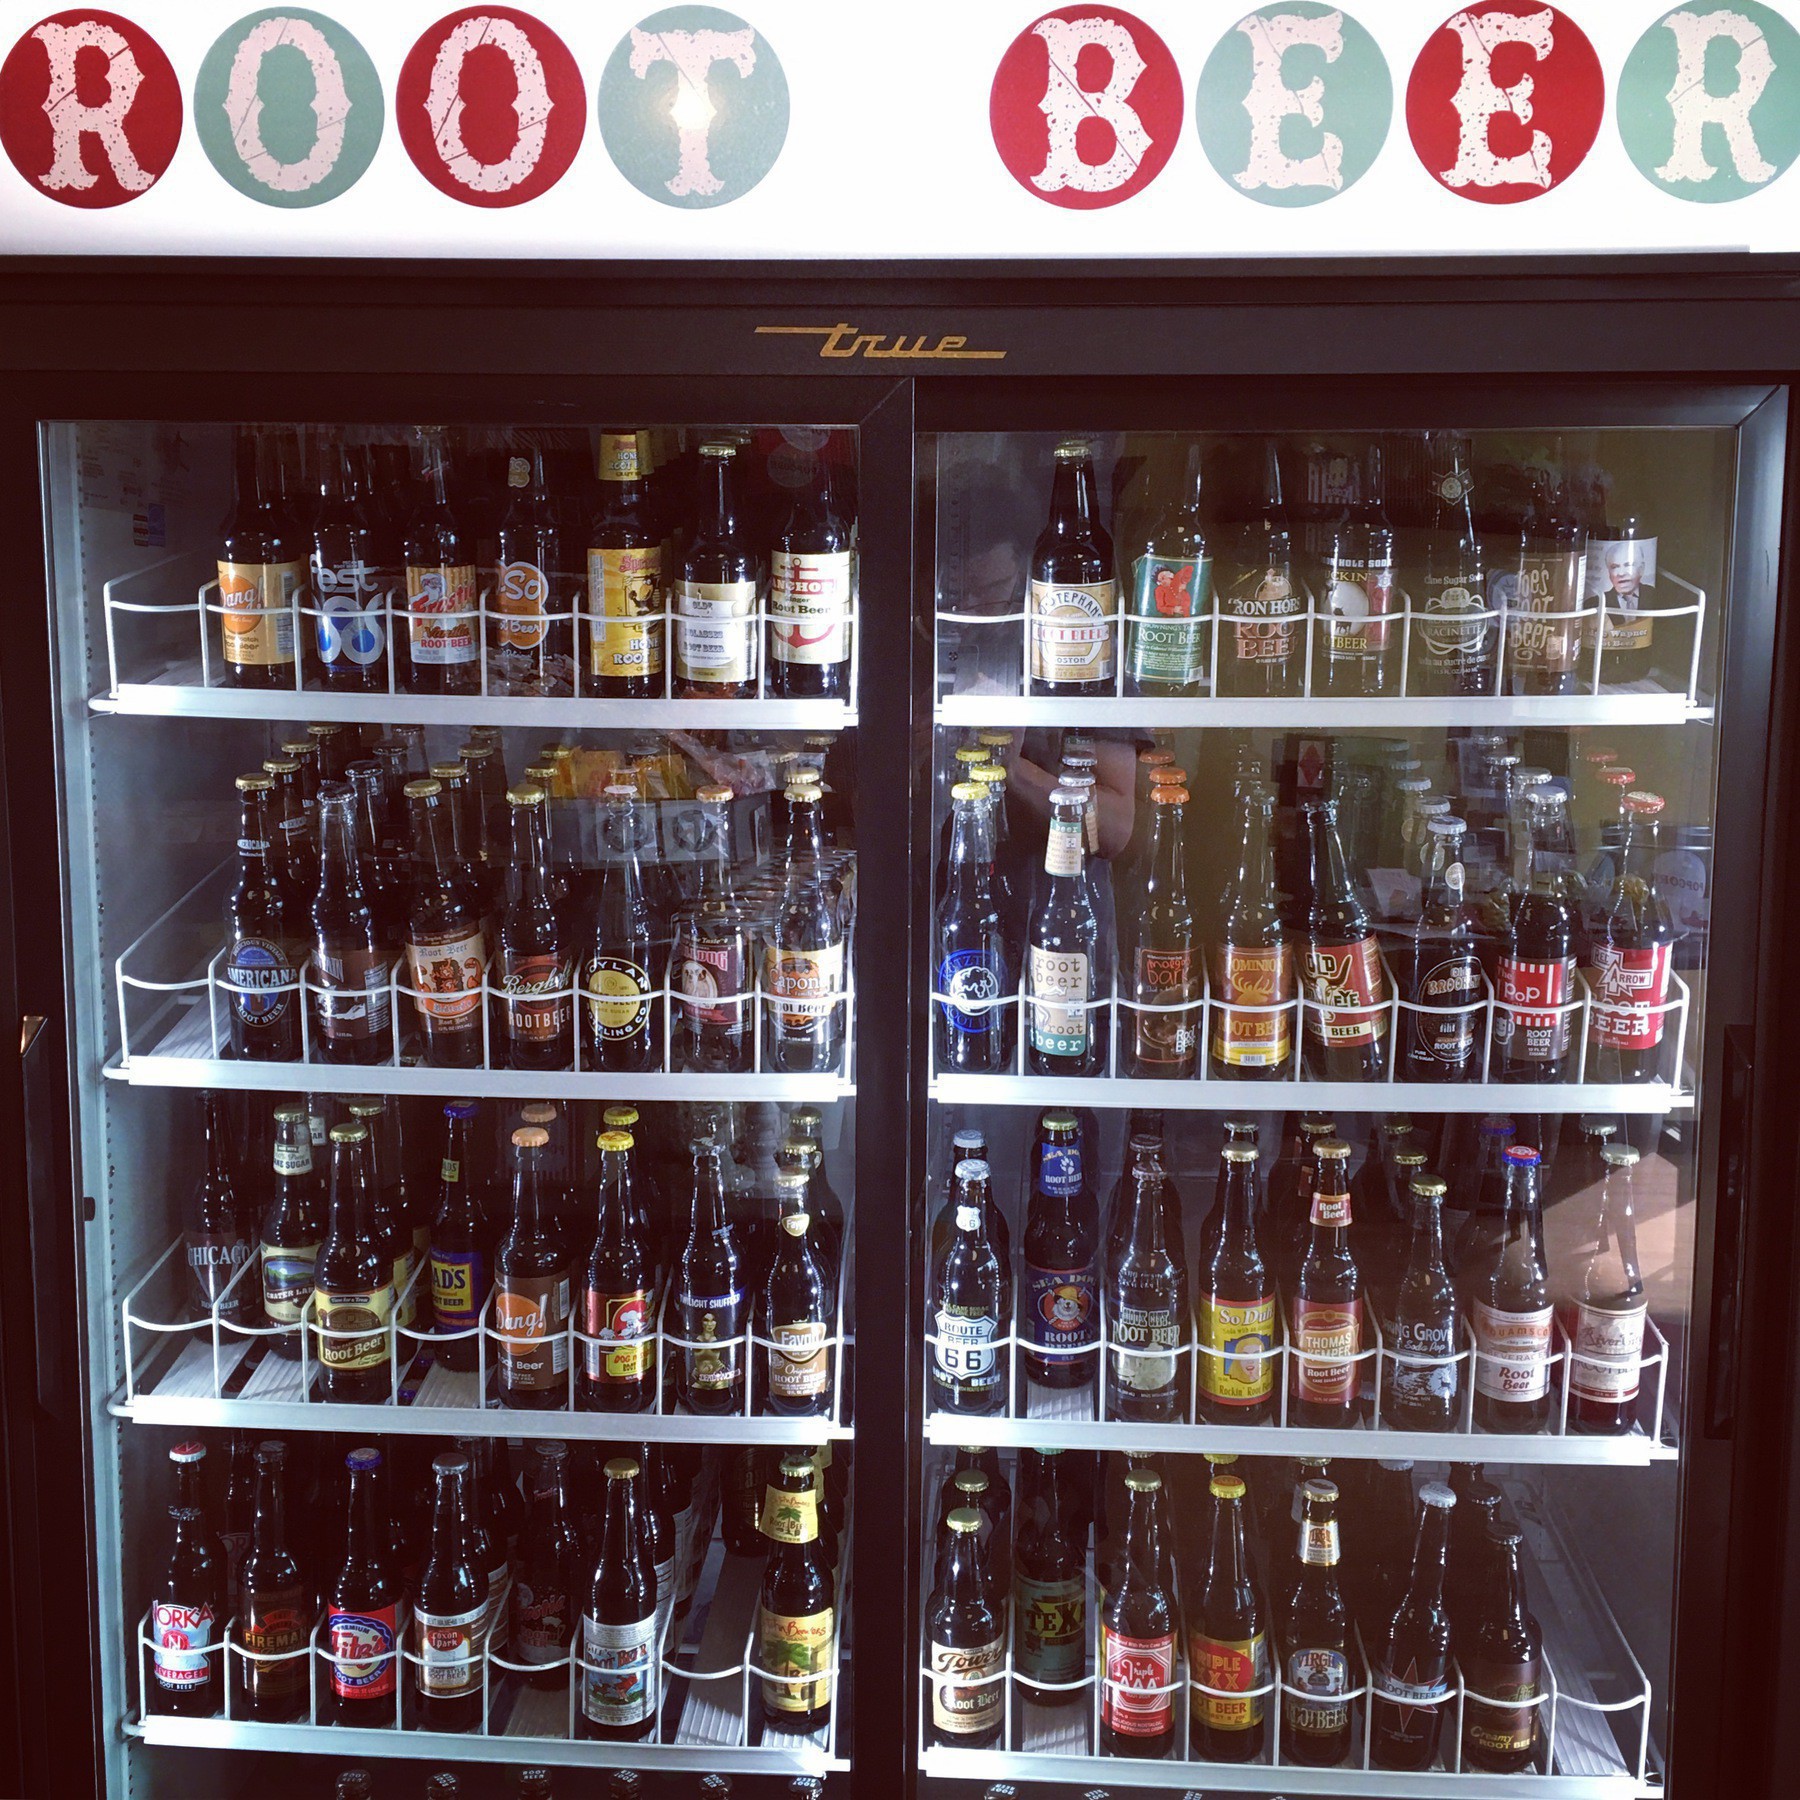 Over 50 kinds of root beer